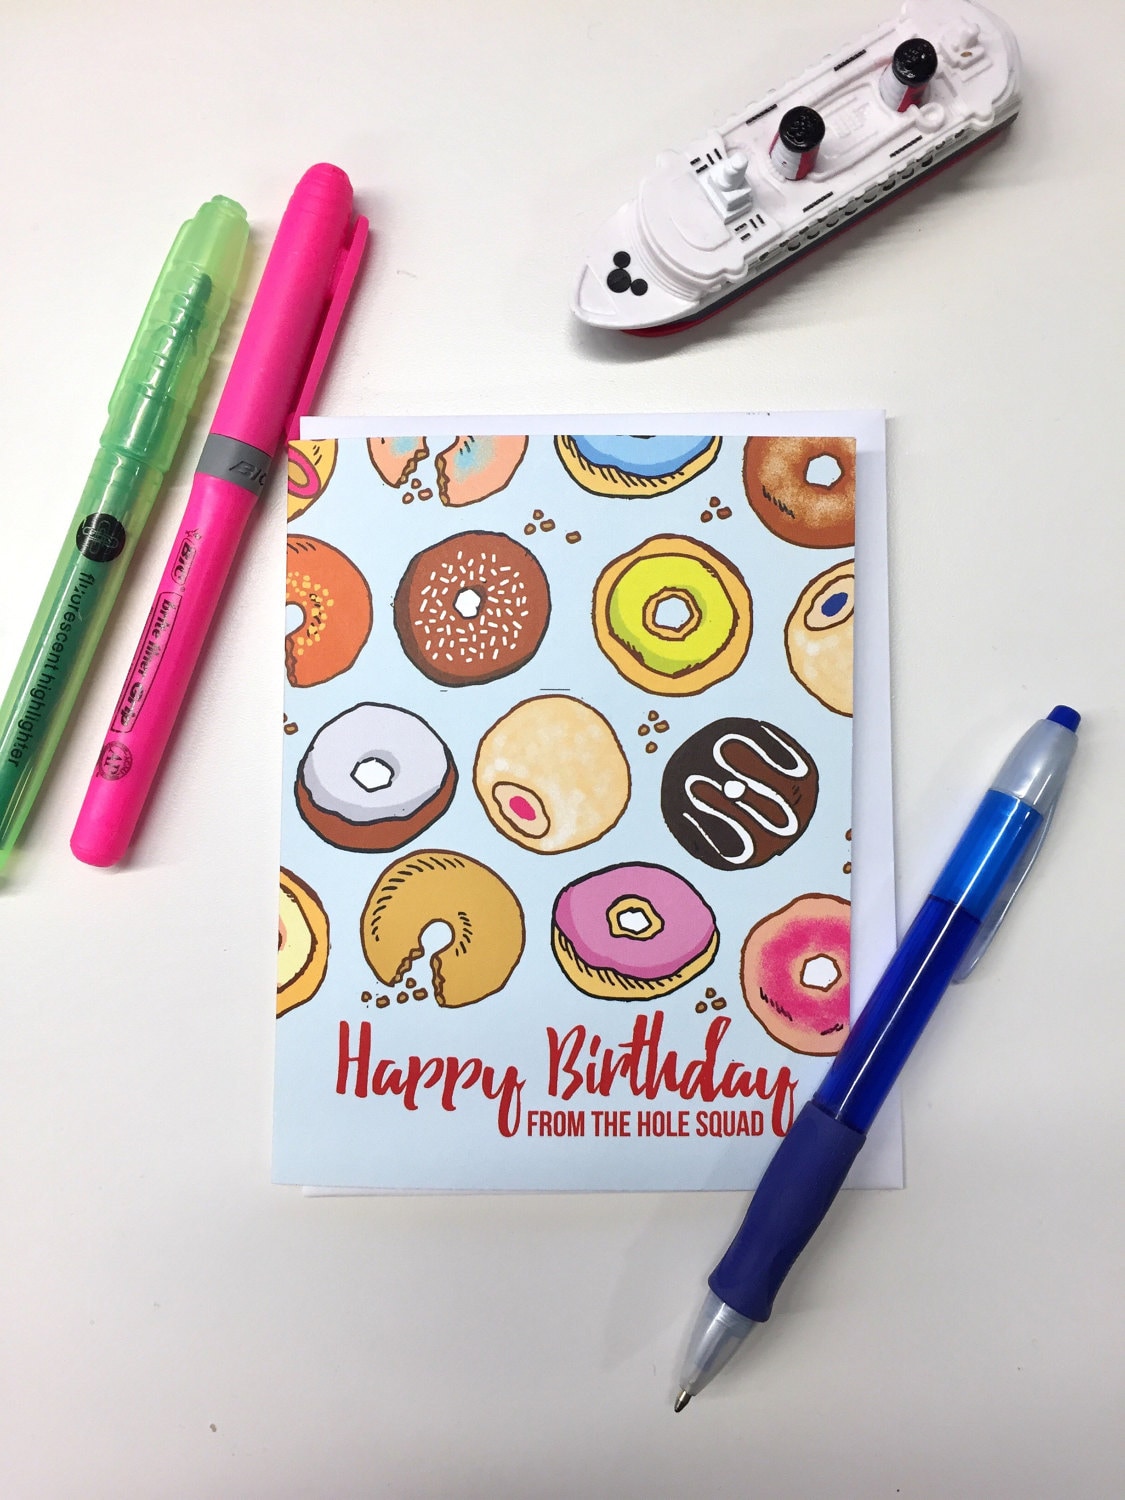 Donut Birthday Card - A2 Handmade Hole SquadFrom All of Us Group Gift Doughnut Card with foiled lettering